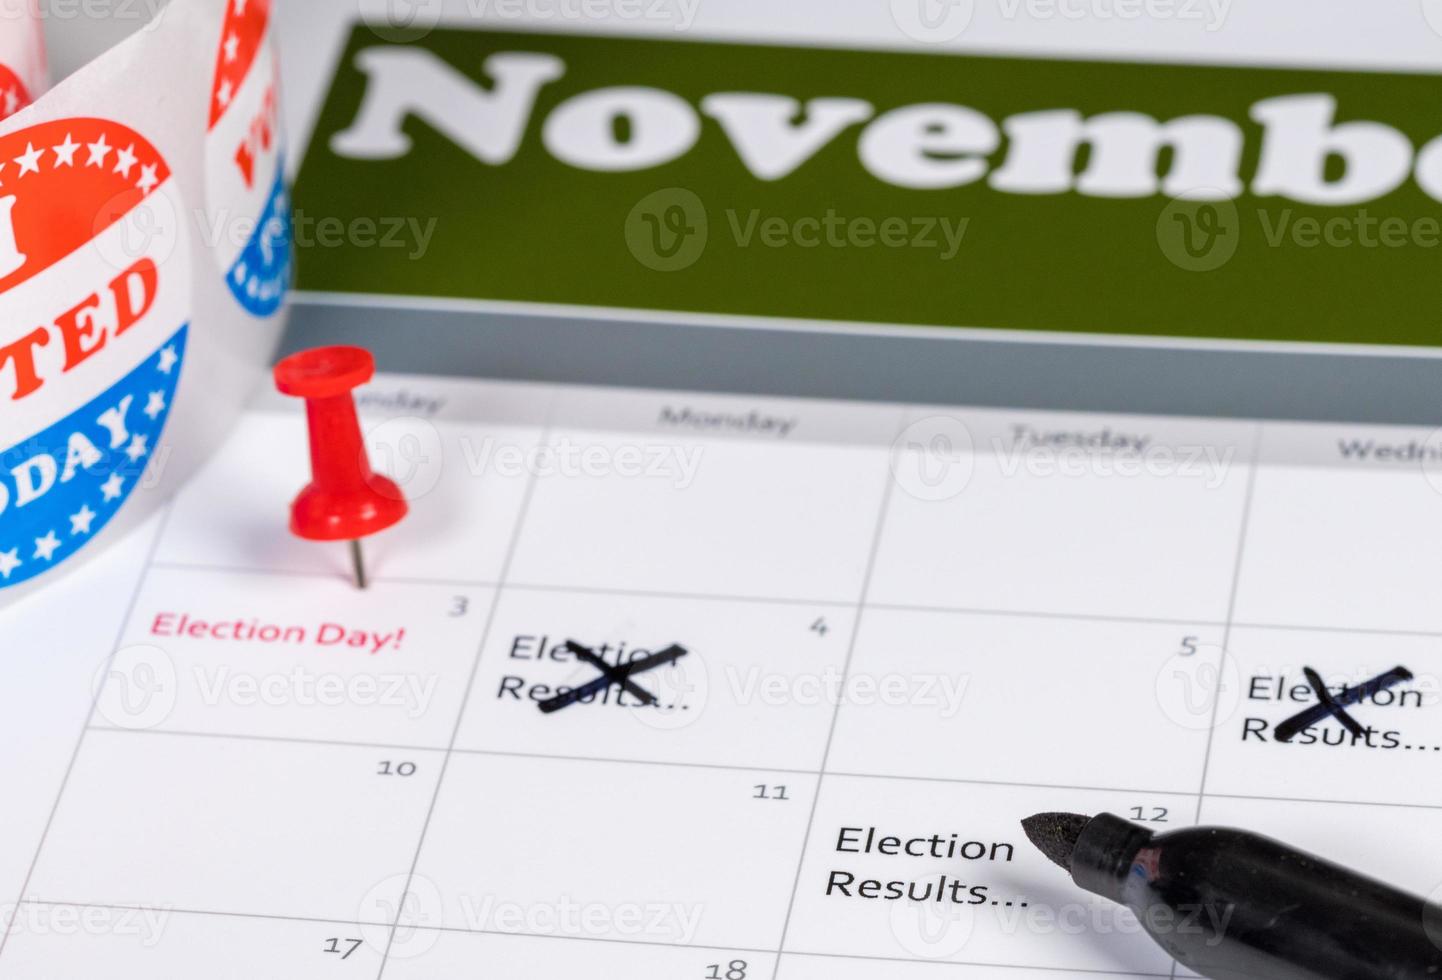 Calendar for November 2020 with election results marked and deleted as delays occur in counting votes photo